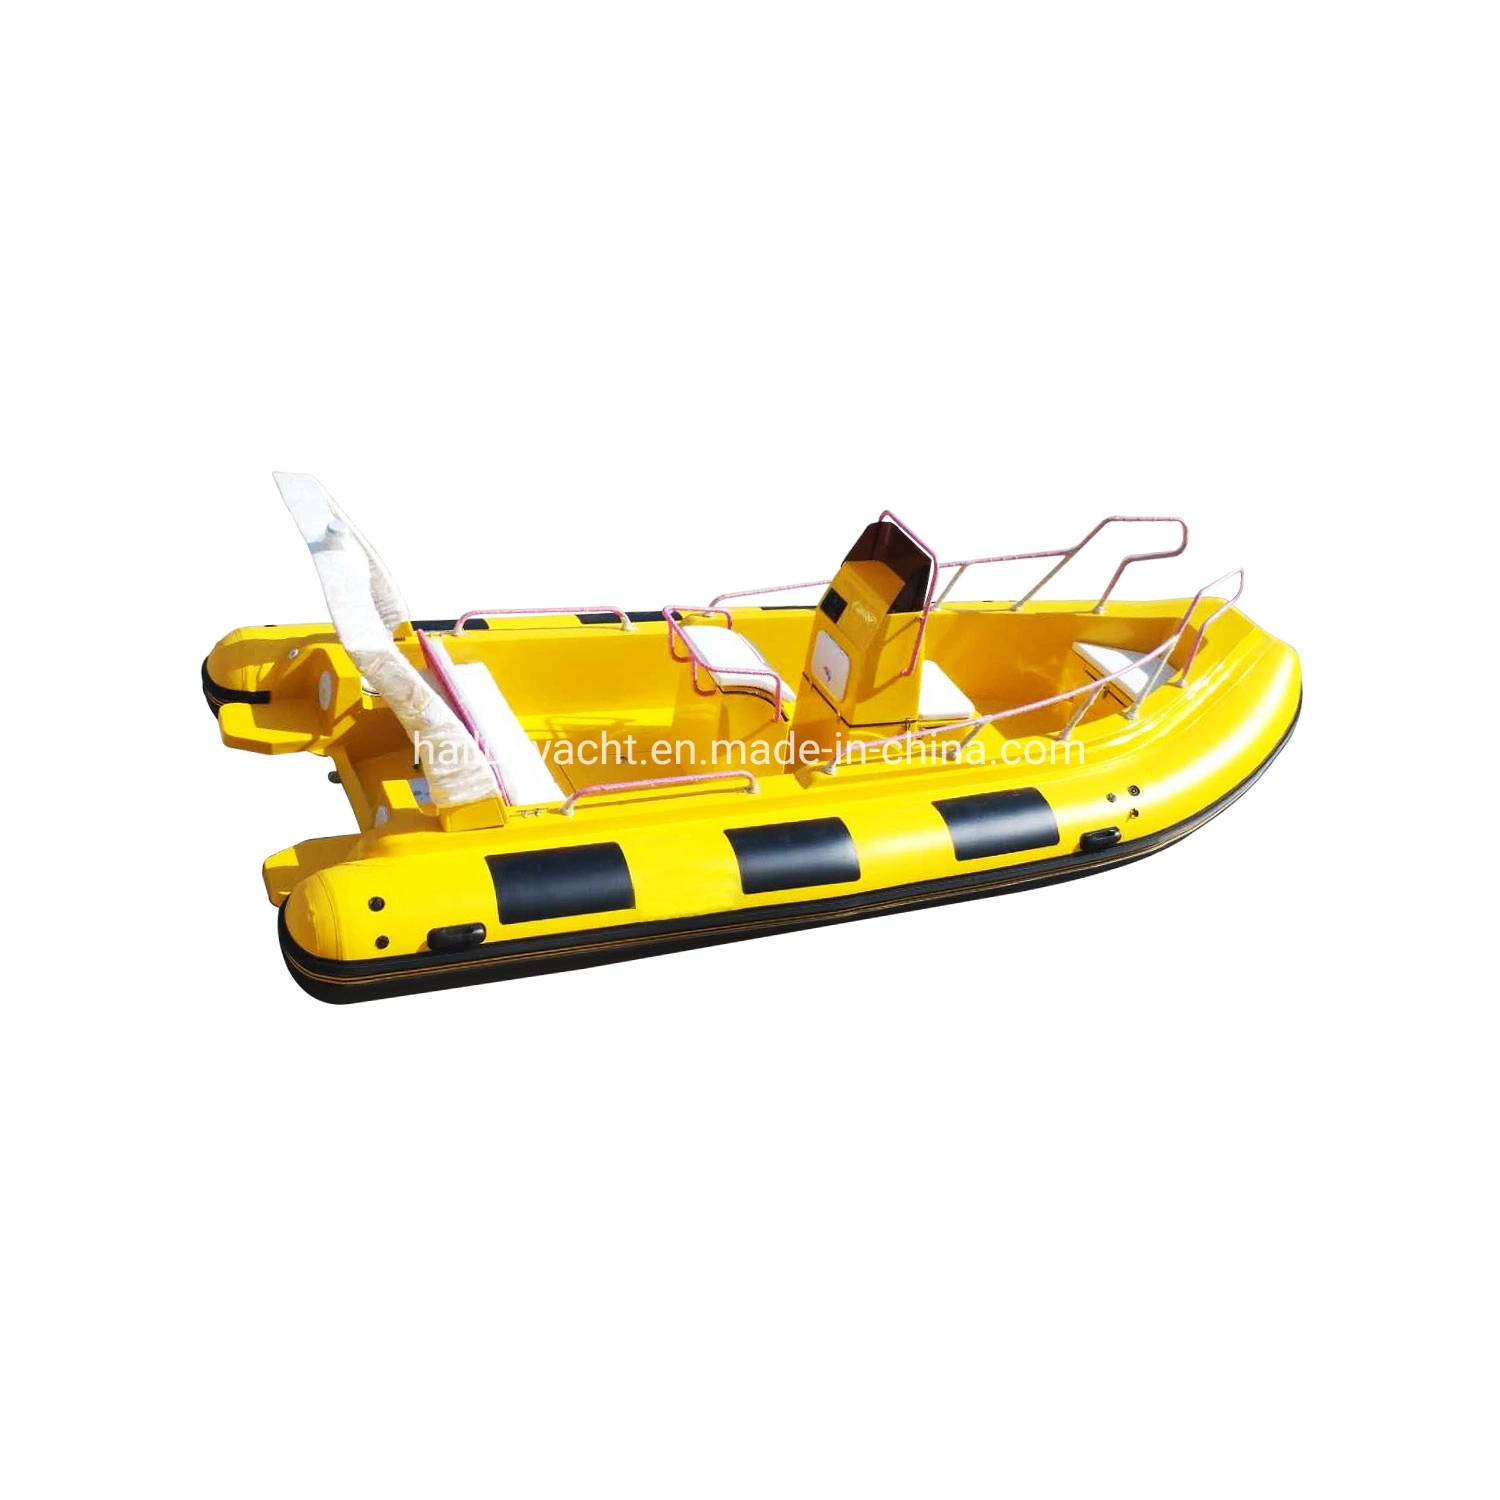 5.8m/ 19 Feet PVC/Hypalon Rib Boat/Power Boat/Motor Boat/Fishing Boat/Speed Boat with Center Console Boat Rib580 Inflatable Boat